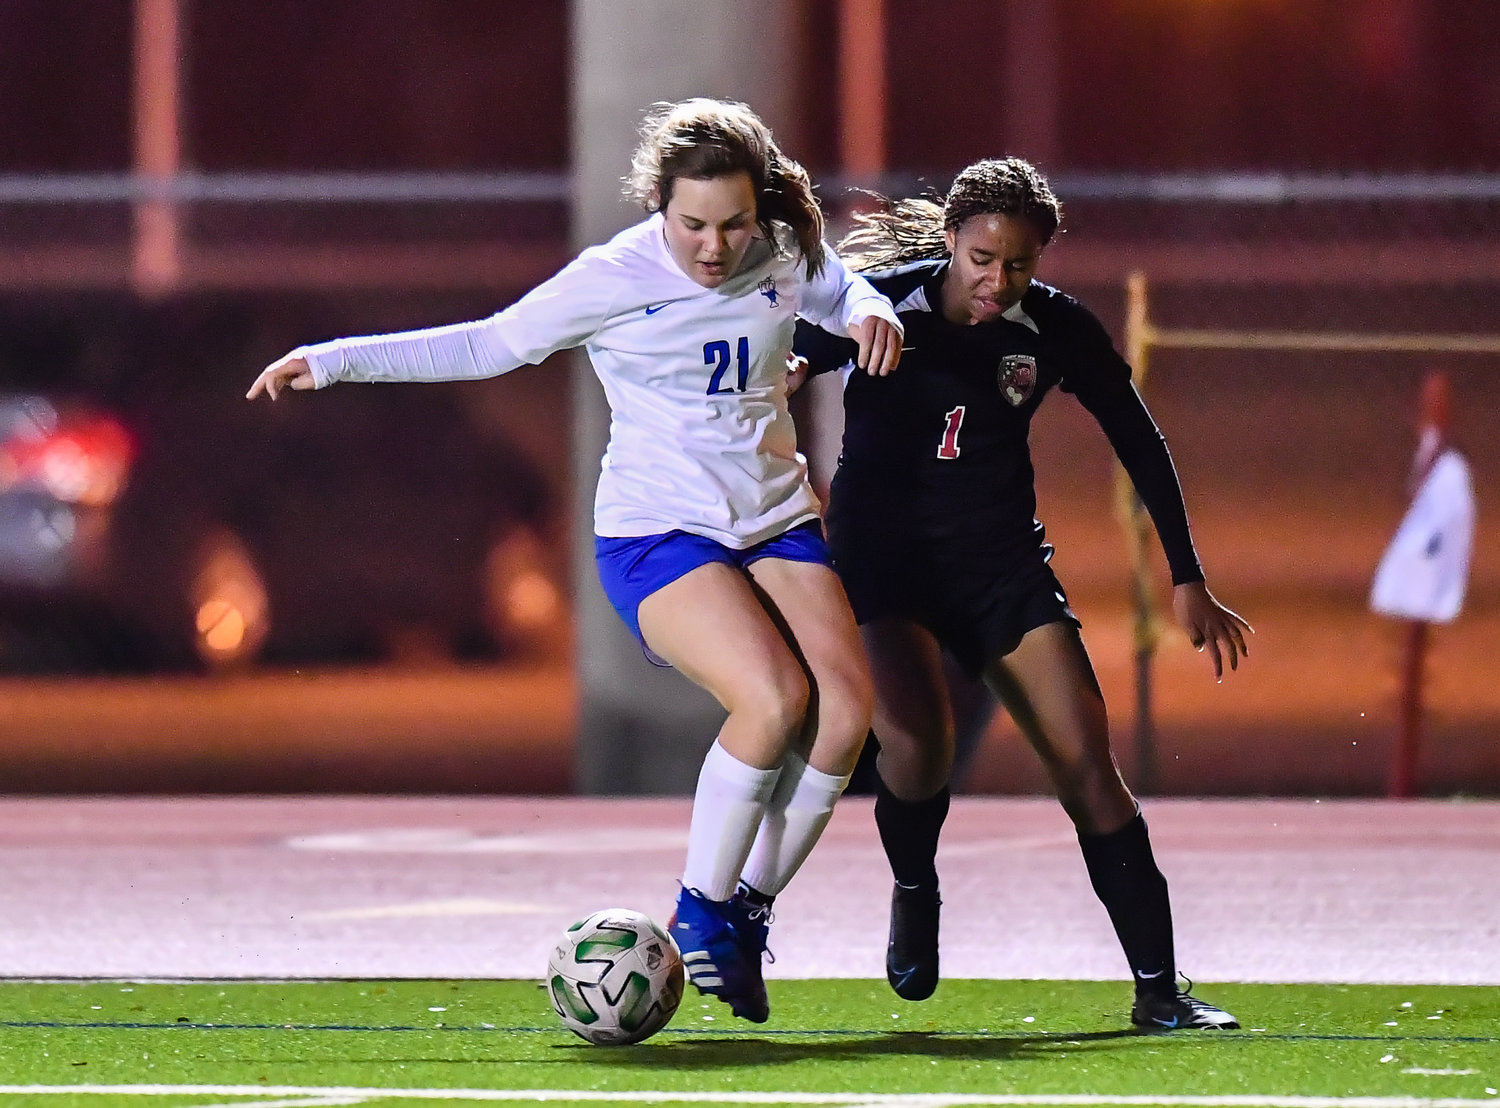 March 8, 2022: Katy's Olyvia Witham #1 and Taylors Regan Arney #21 scramble for the ball during the Katy vs Katy Taylor soccer match at KHS. (Photo by Mark Goodman / Katy Times)